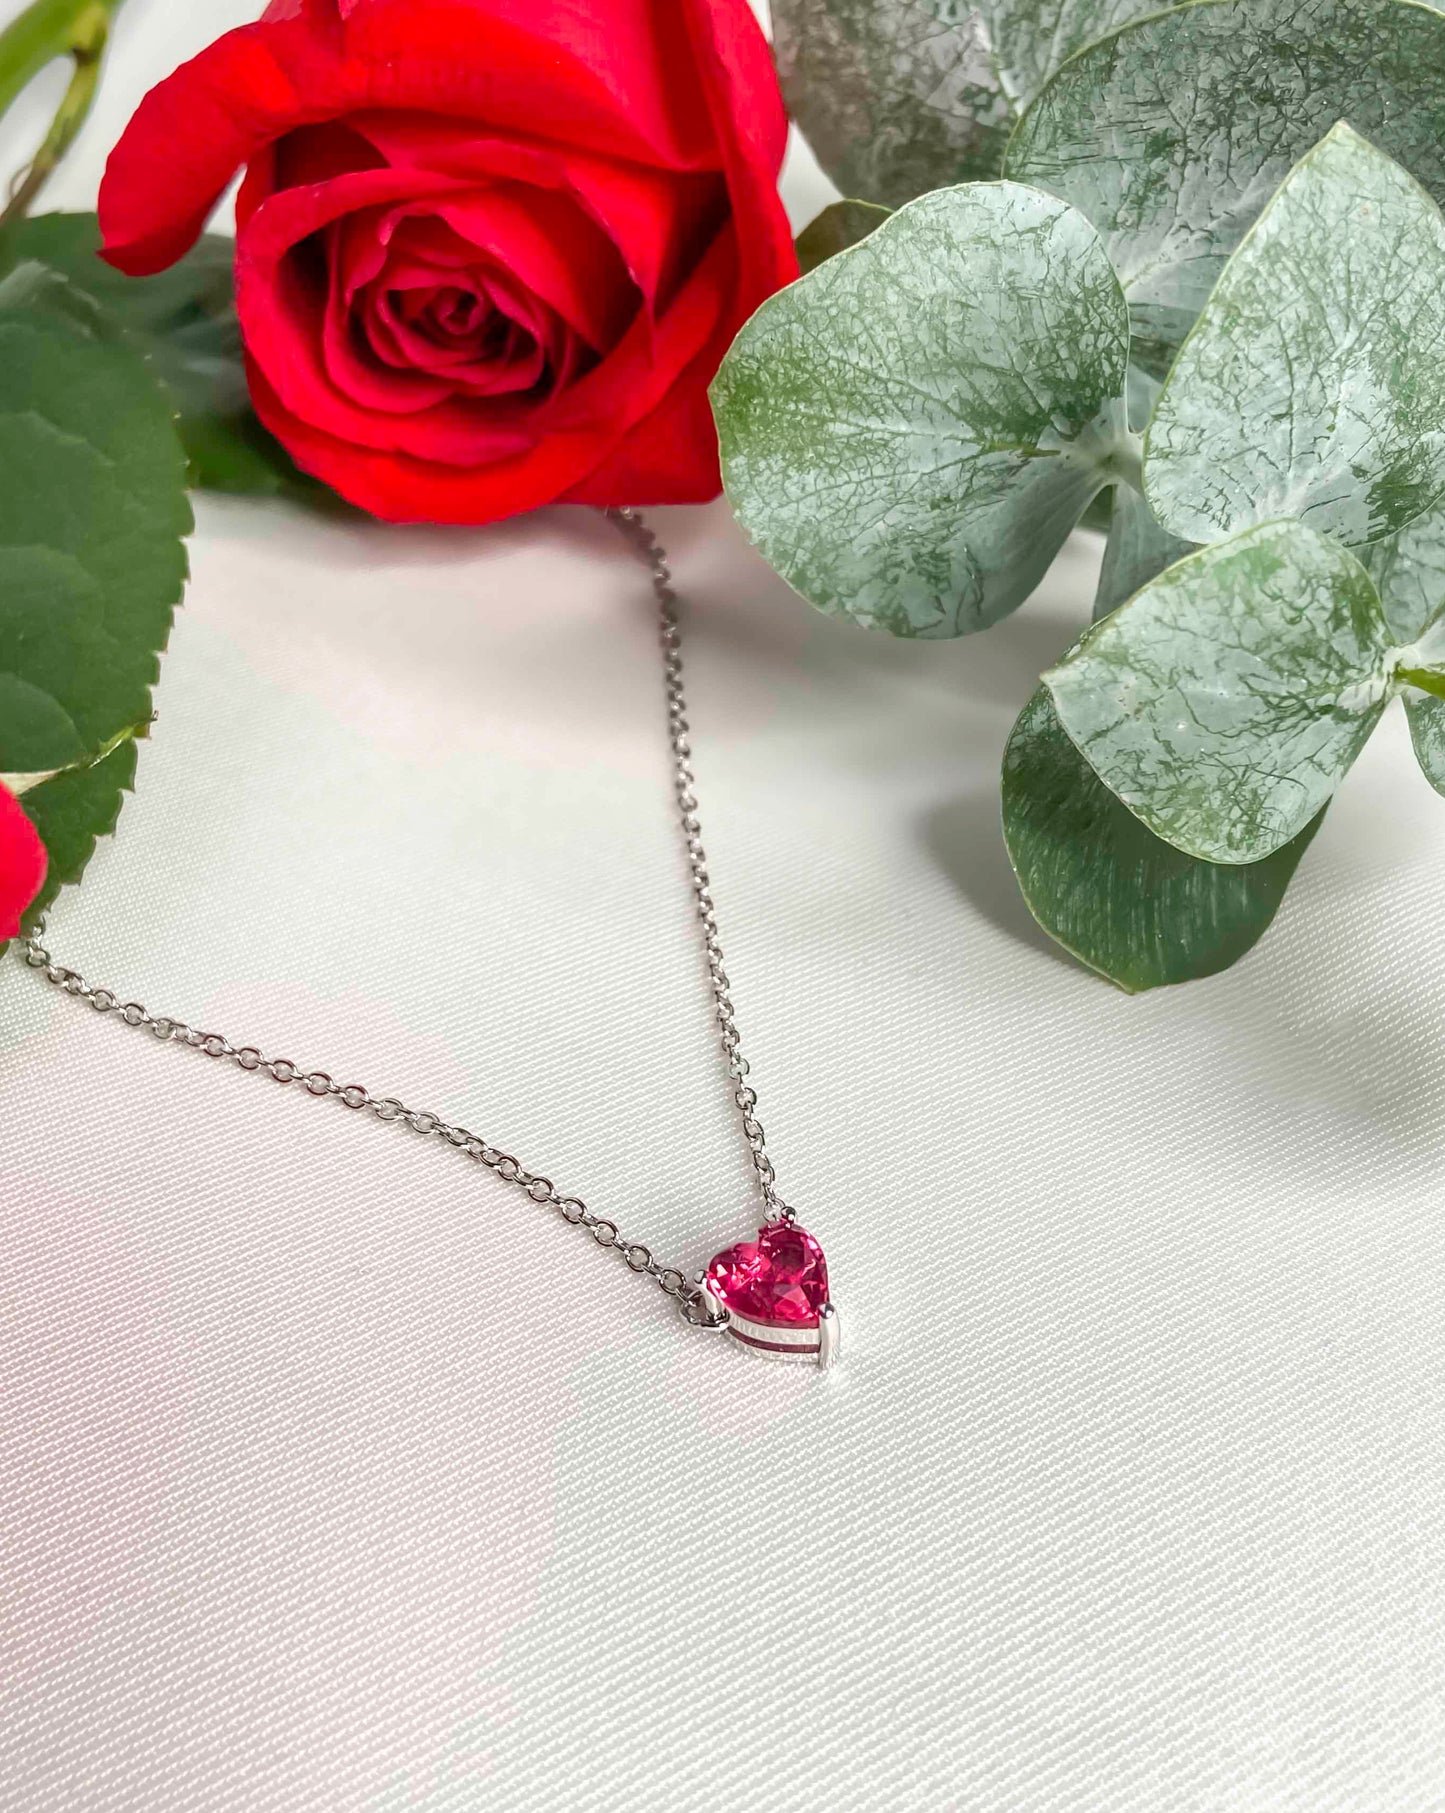 925 sterling silver chain necklace with a heart shaped rubellite gemstone.